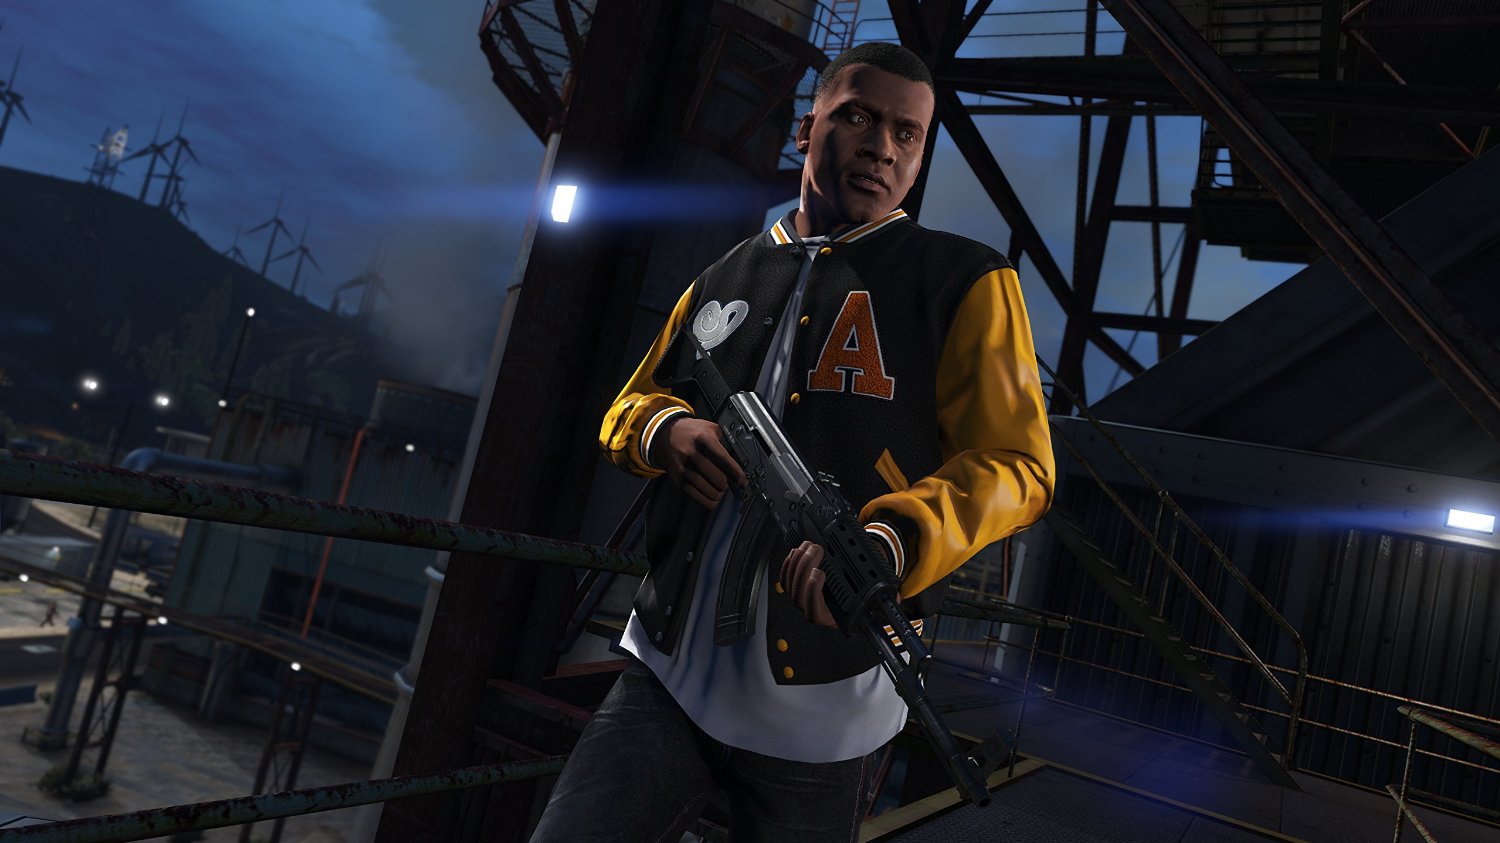 GTA 5 Game Free Download Full Version For PC Windows 7/8/10  One Stop